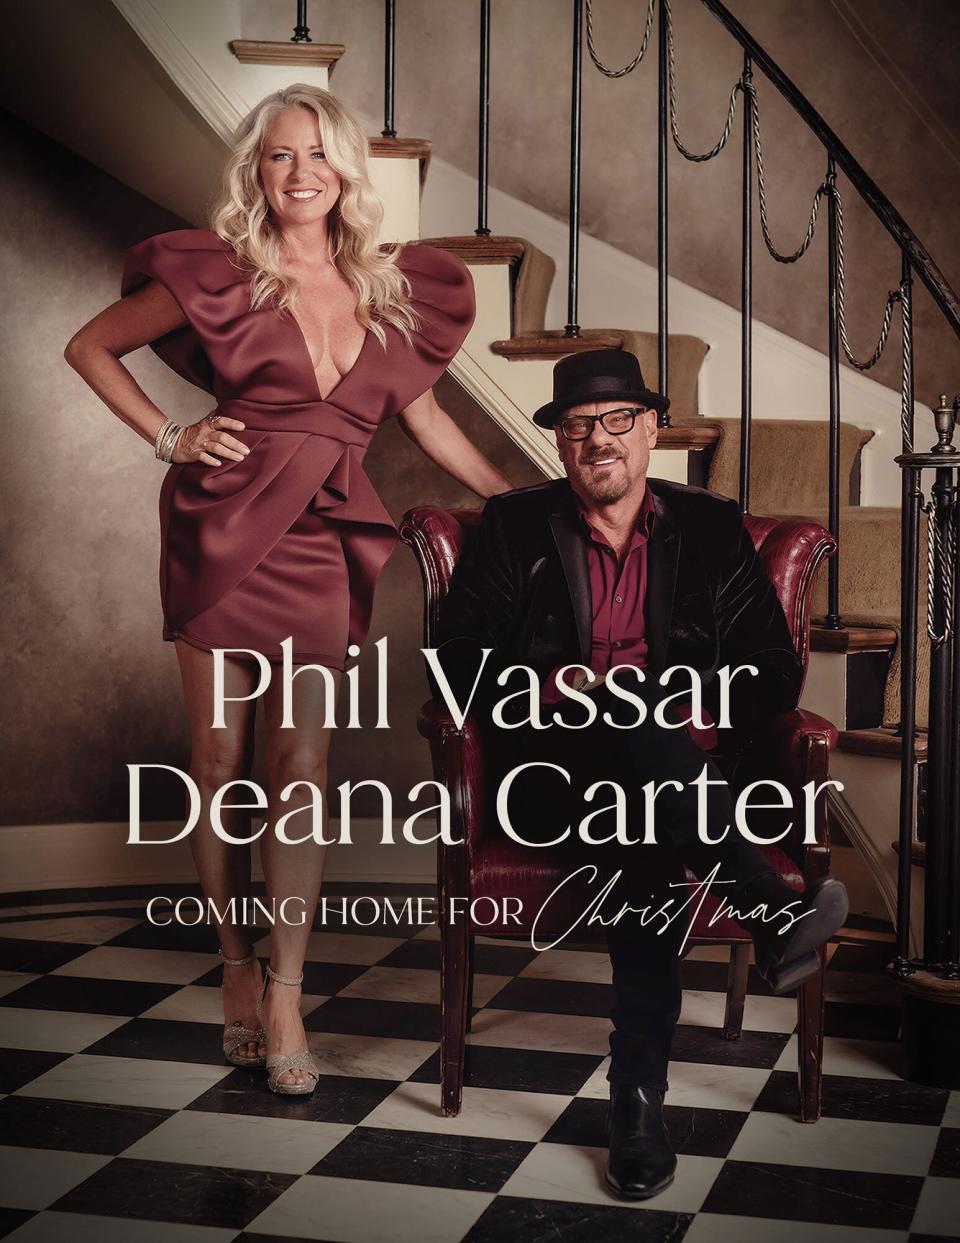 Deana Carter and Phil Vassar Team Up for Holiday Song 'Brand New Year': 'We Hope Everyone Loves It'